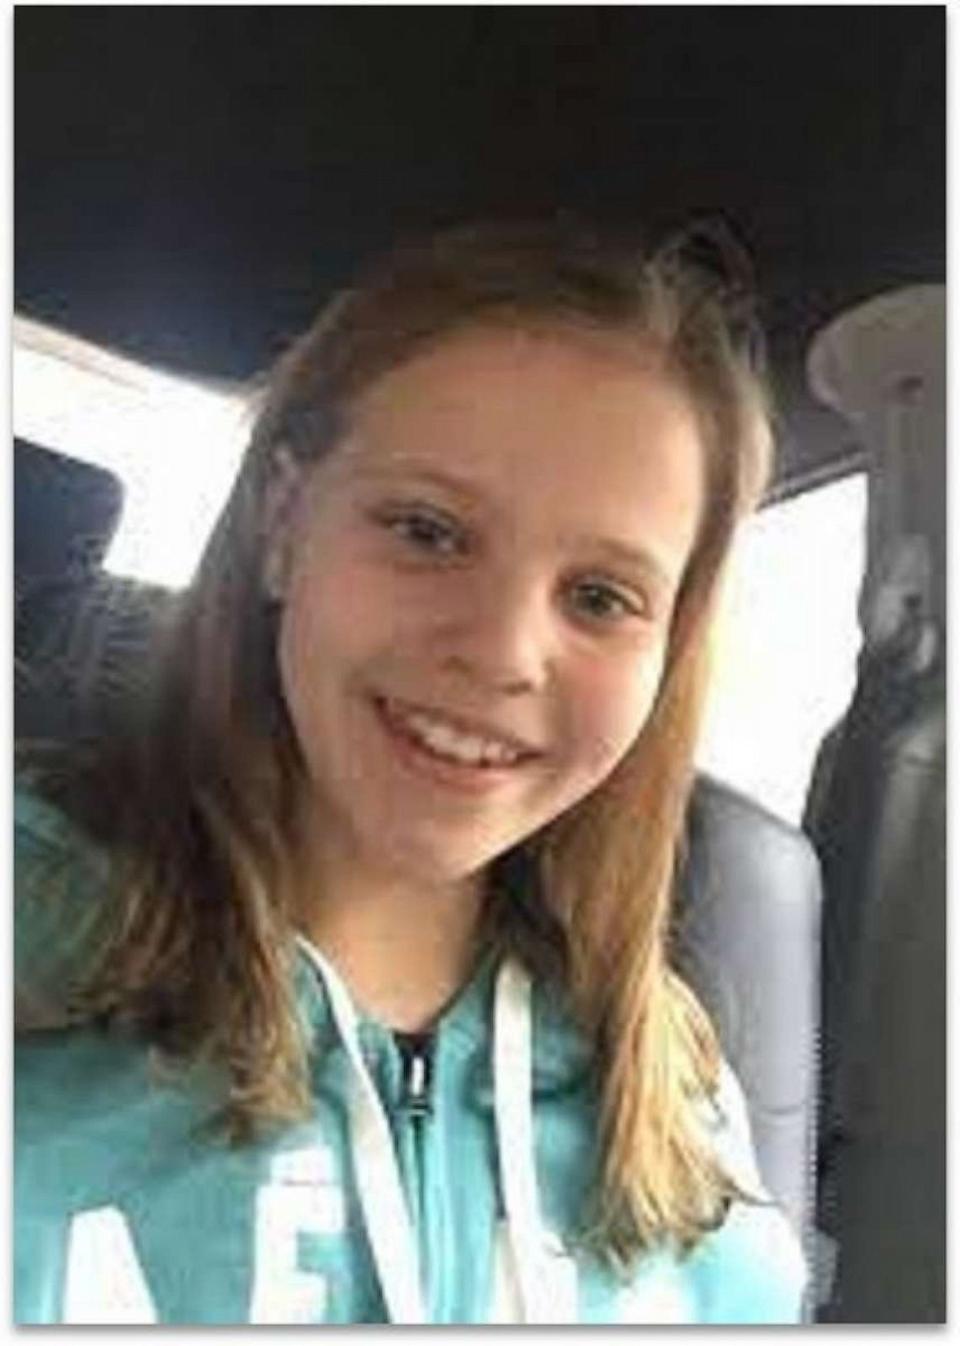 PHOTO: Mallory Grossman was 12-years-old when she died by suicide in 2017. (Bruce H. Nagel, Grossman family attorney)